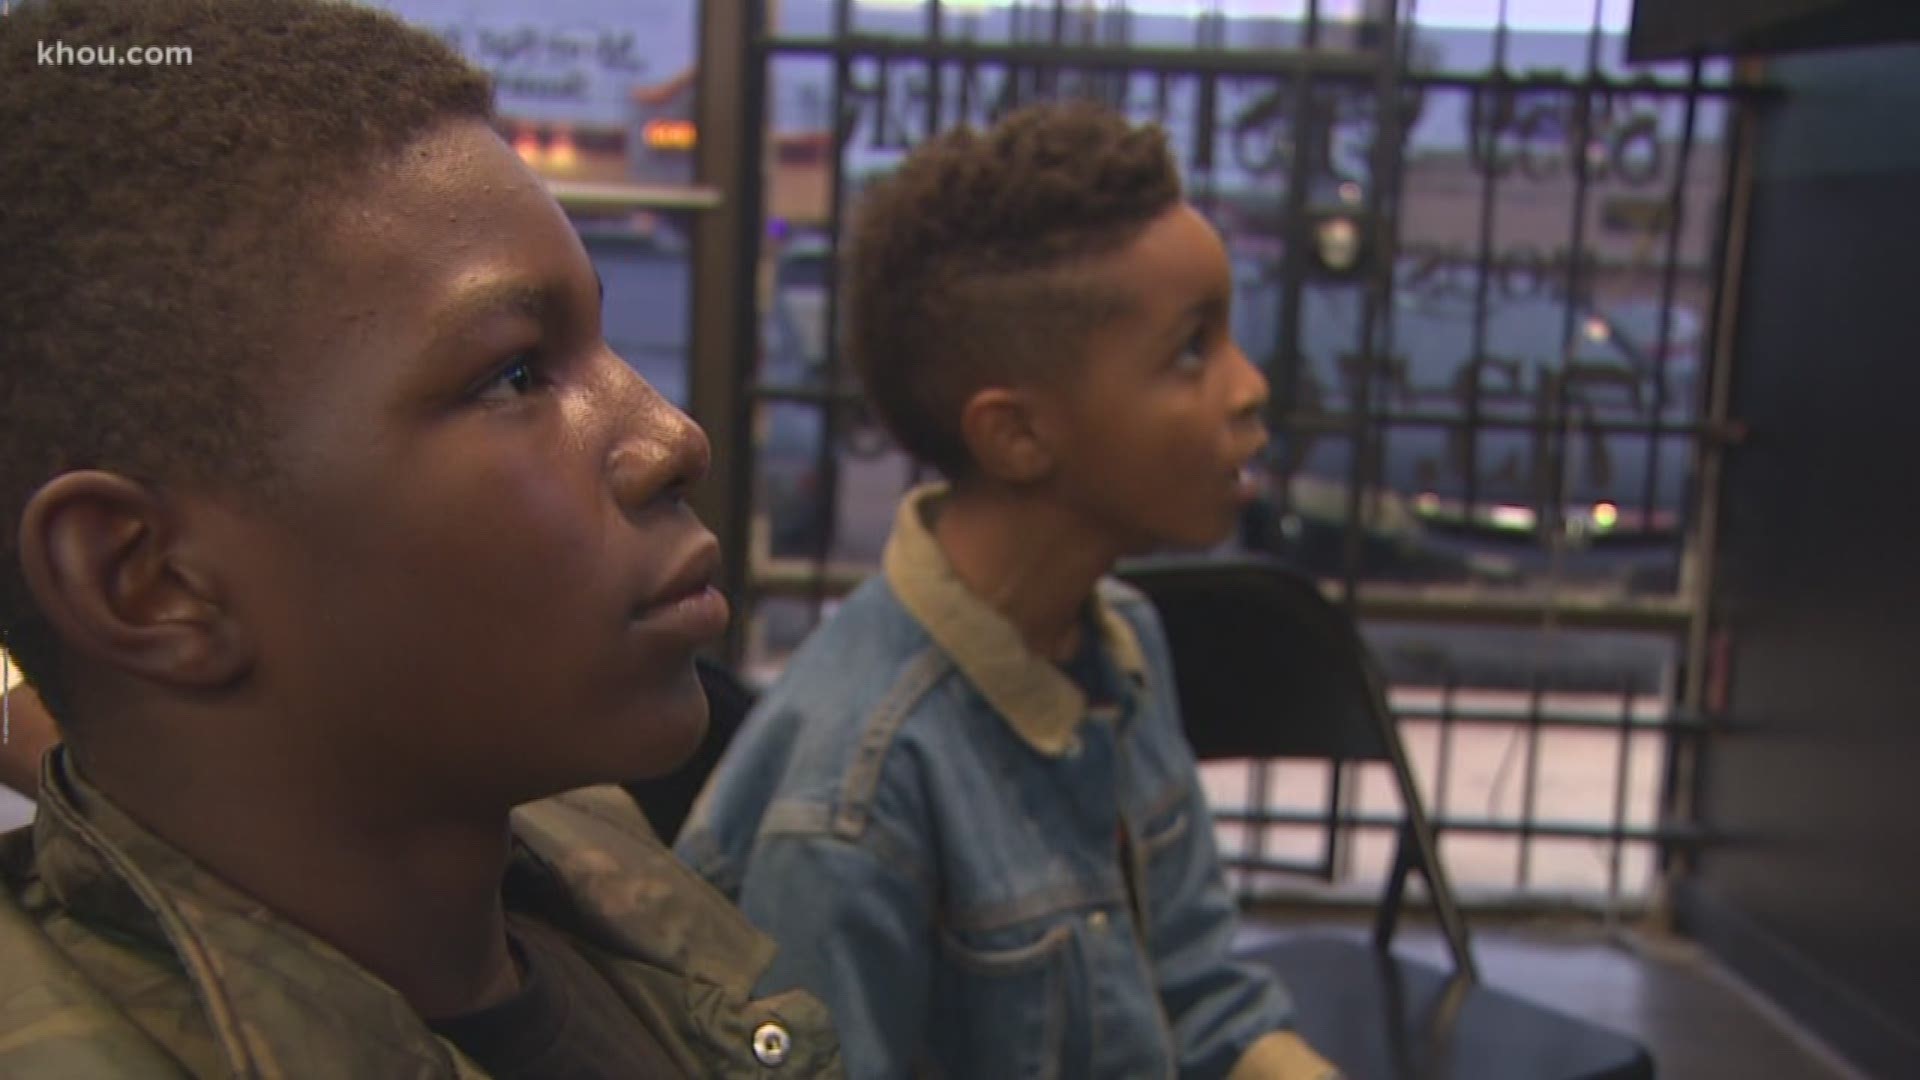 A Houston dad talks about how he decided to find out why a boy was bullying his son.